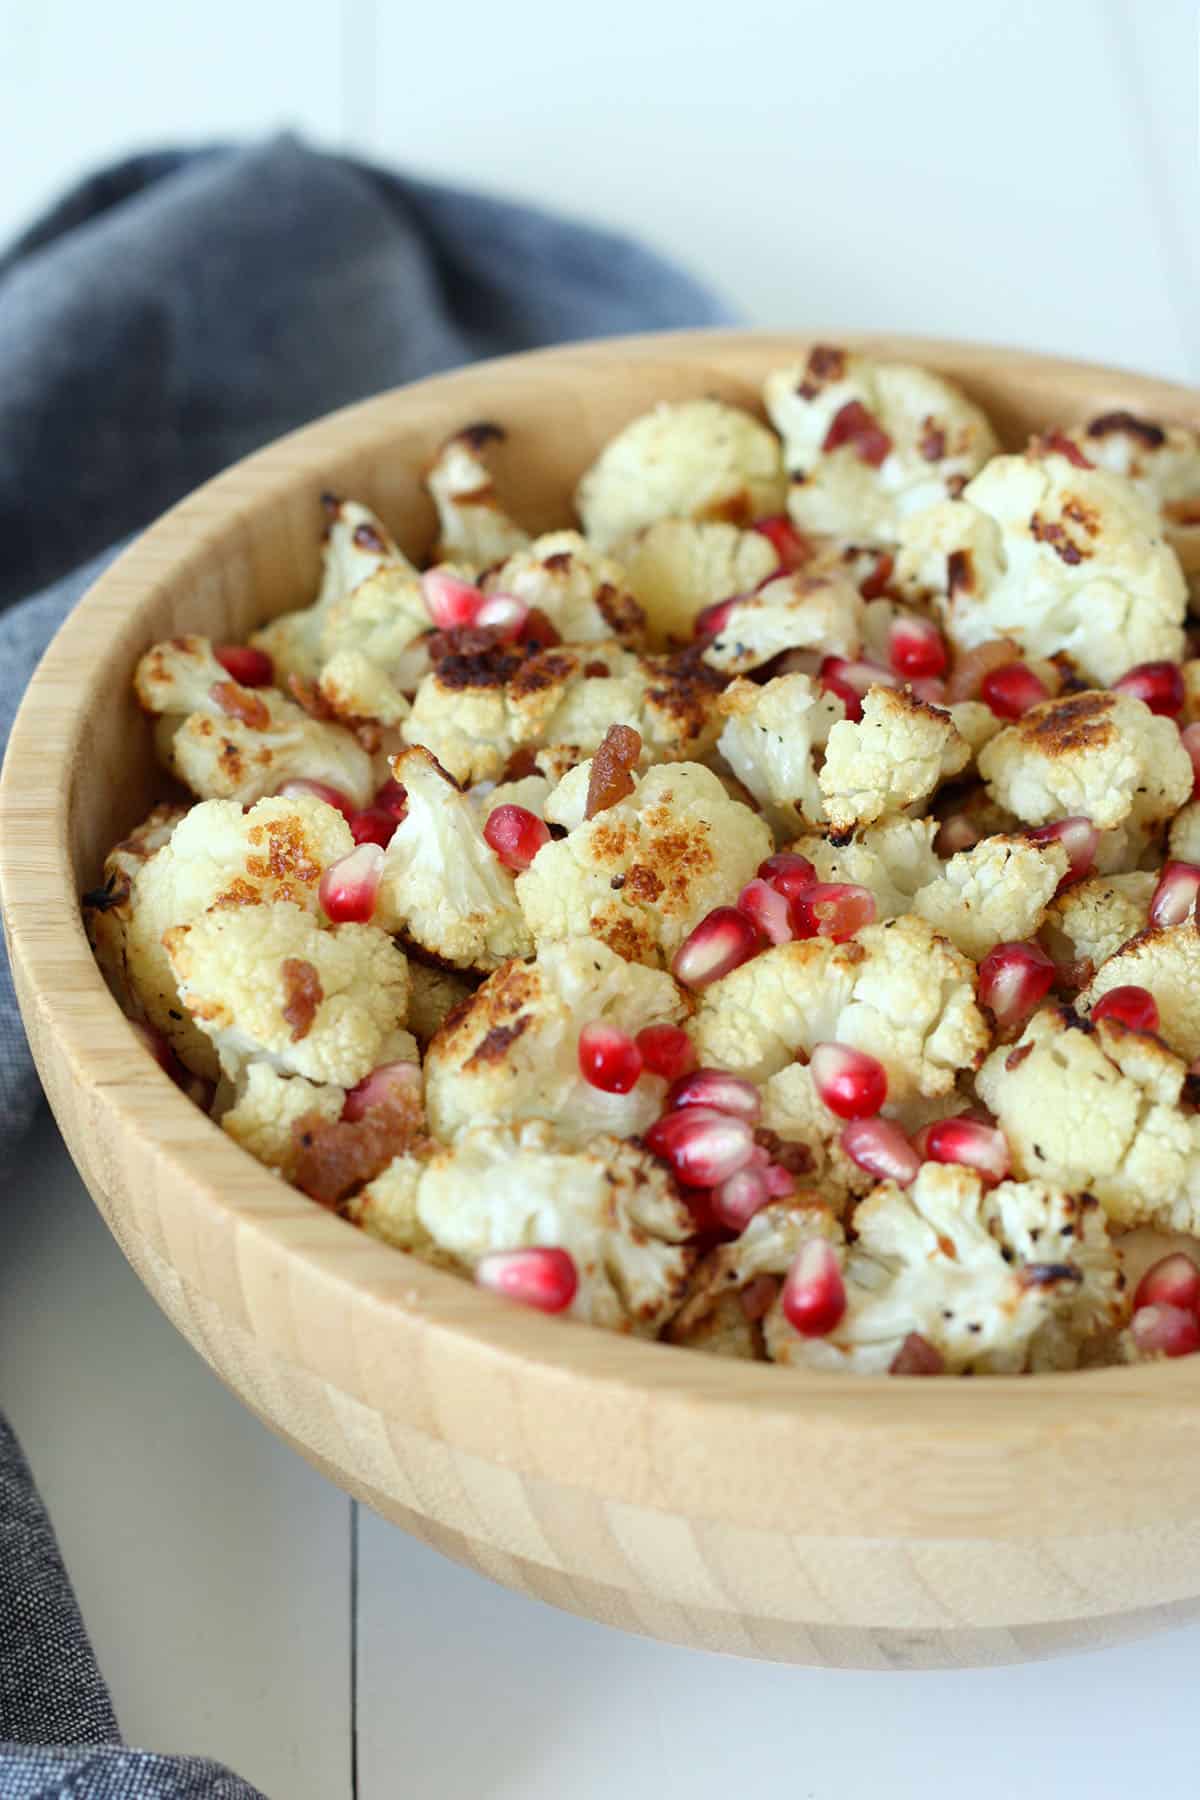 roasted cauliflower in a wood bowl with bacon pieces and pomegranate arils